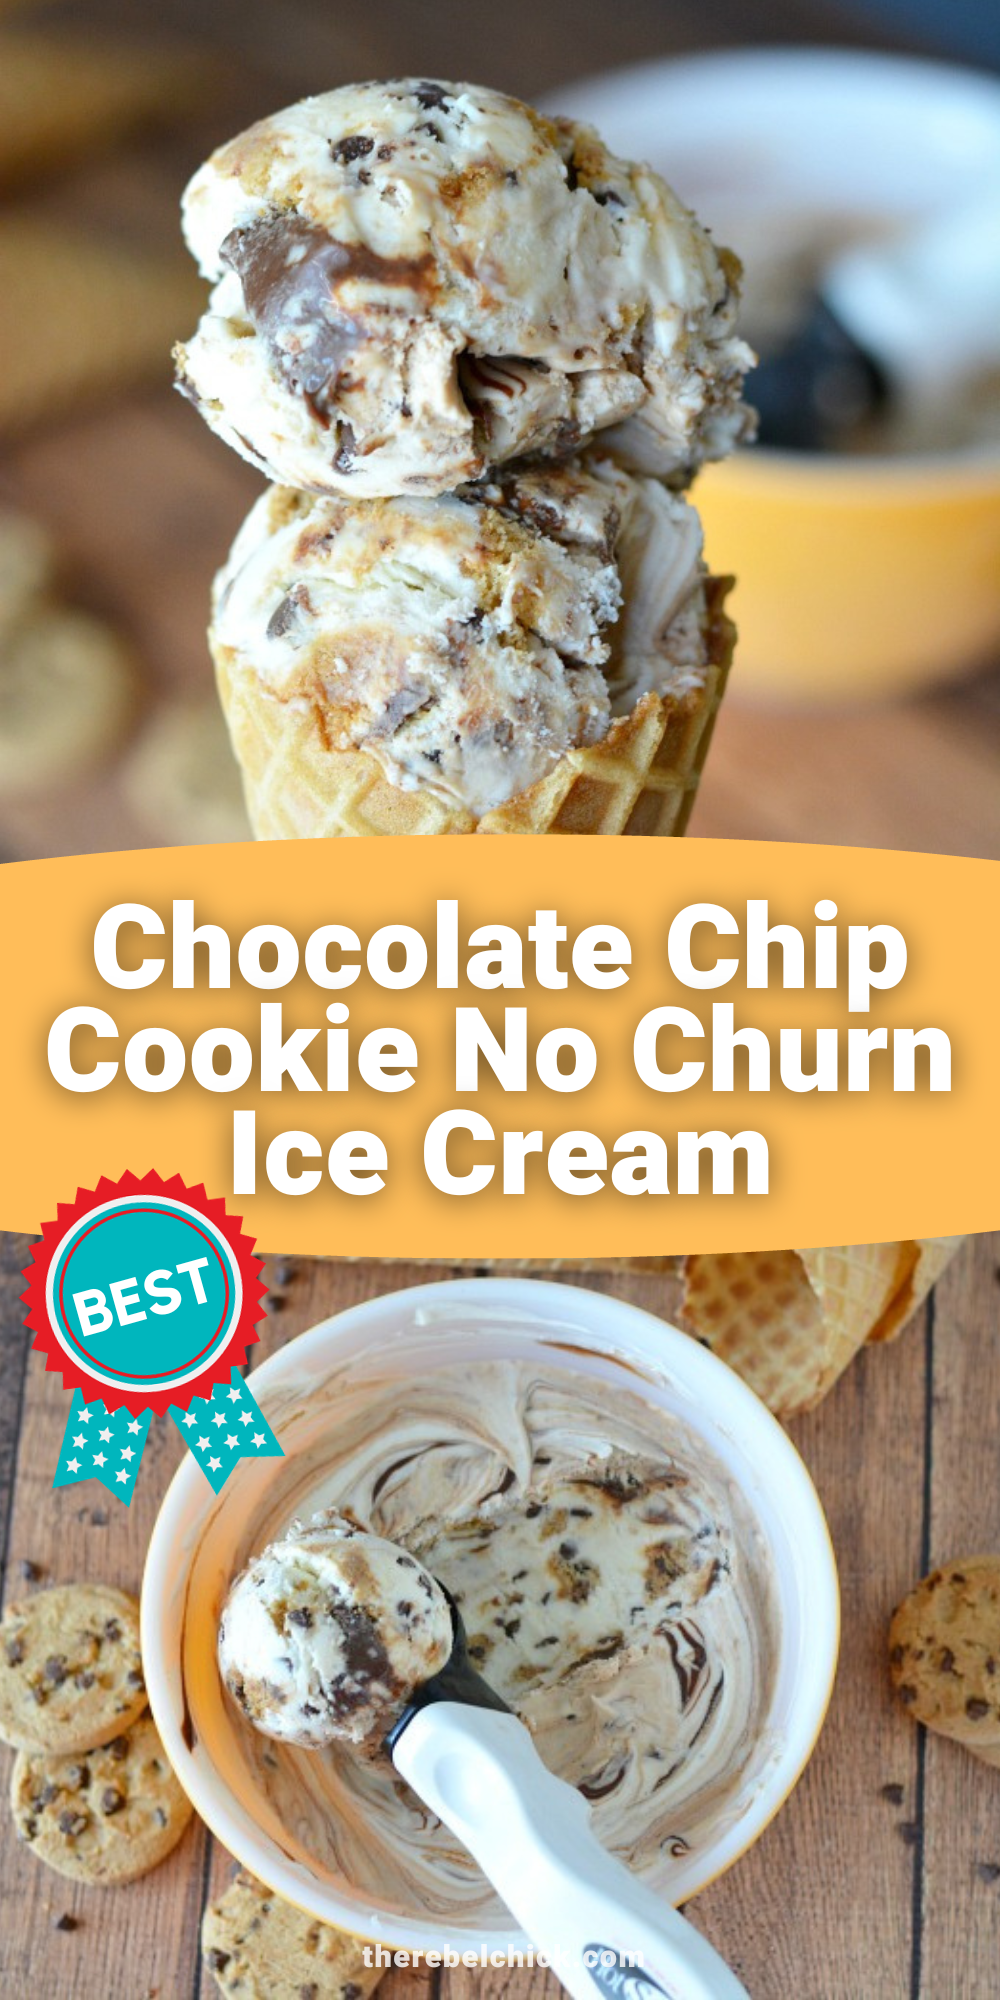 This Chocolate Chip Cookie No Churn Ice Cream Recipe comes in handy year-round! It is so tasty and so easy to make!